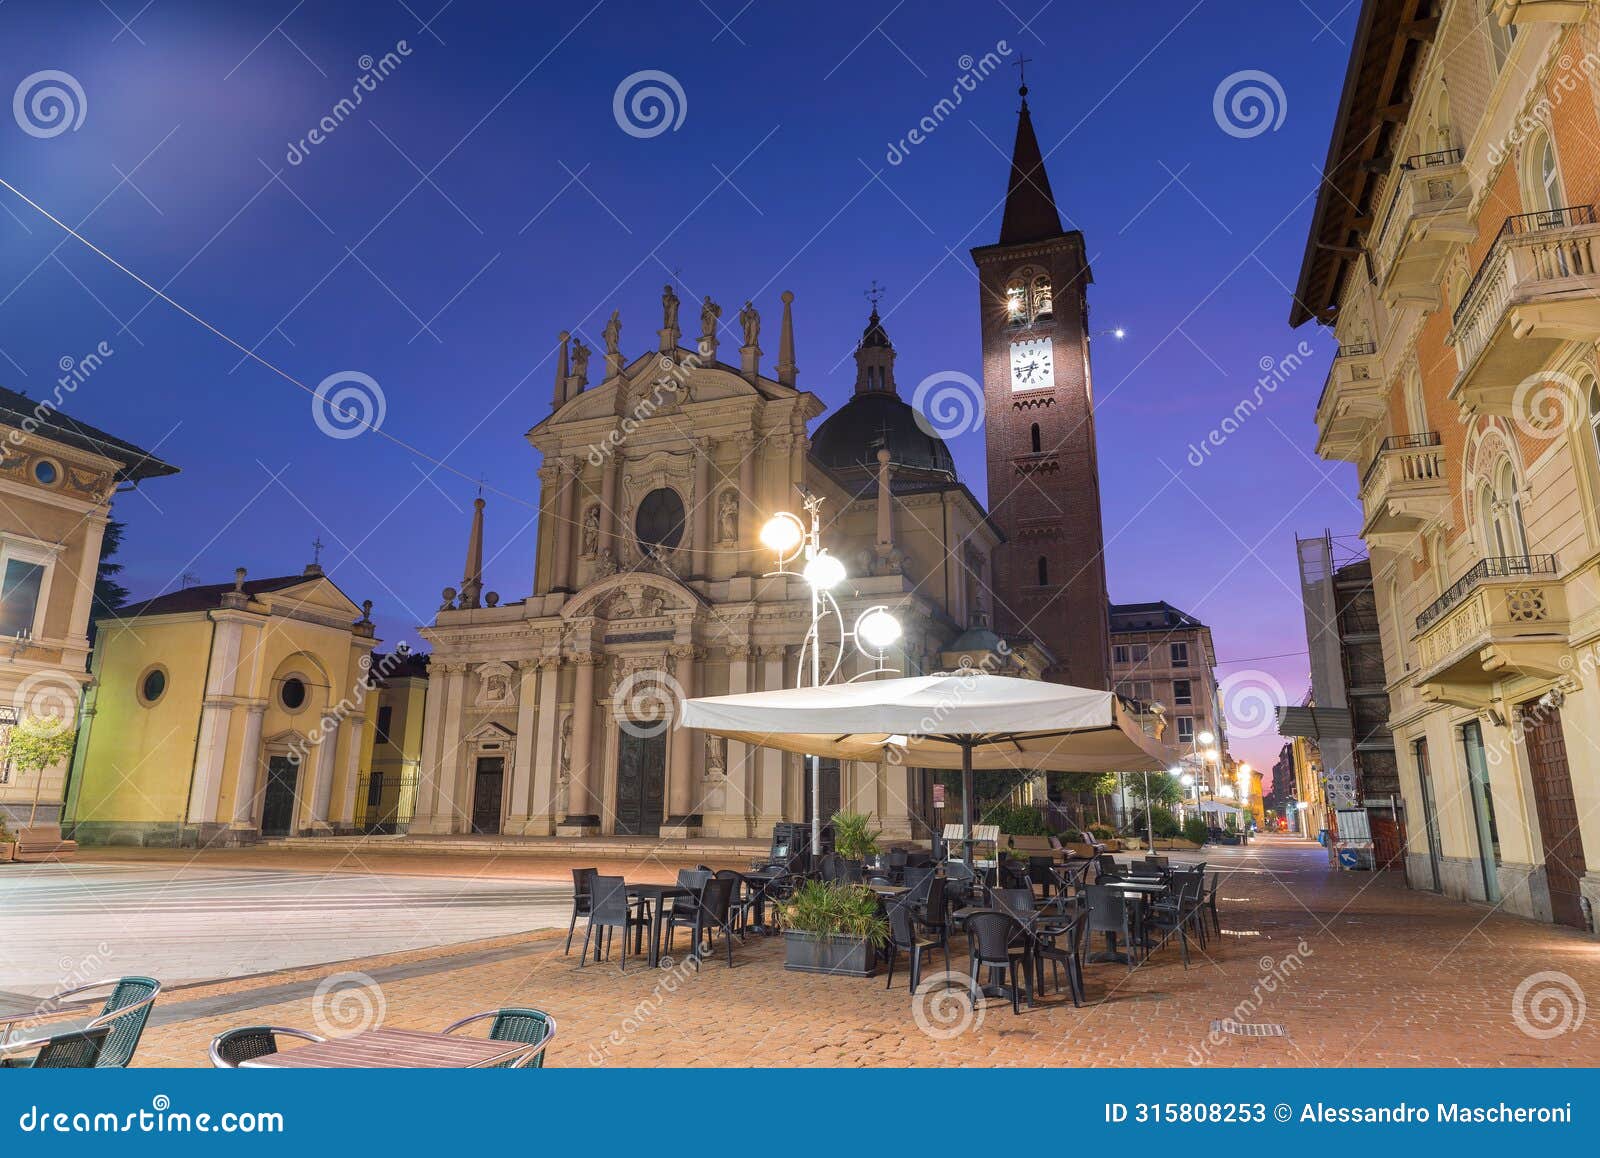 historic center of an italian city at dawn with outdoor bars, busto arsizio